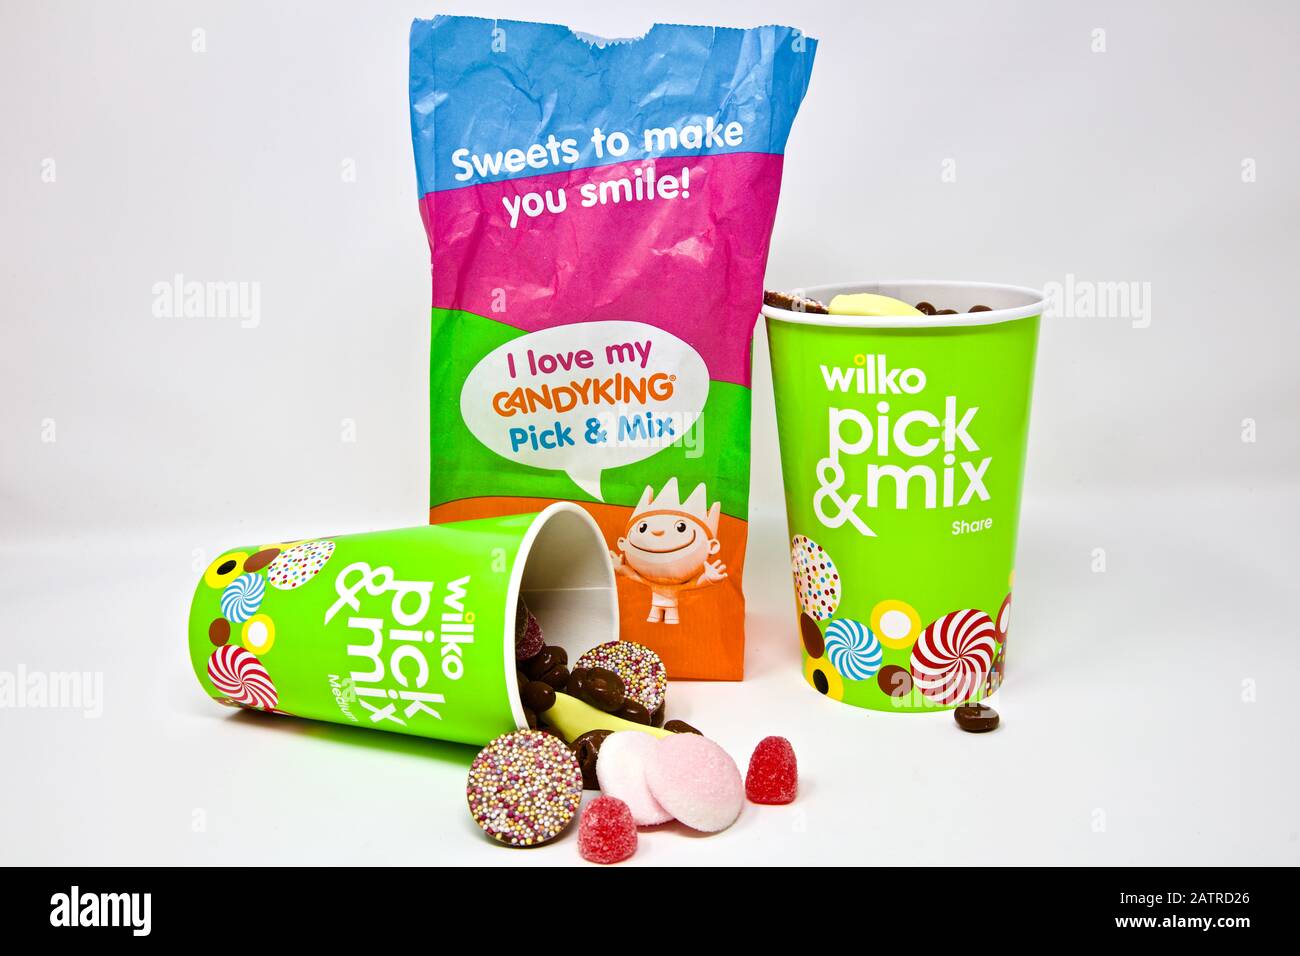 Wilko - pick and mix of Candy King Favourites Stock Photo